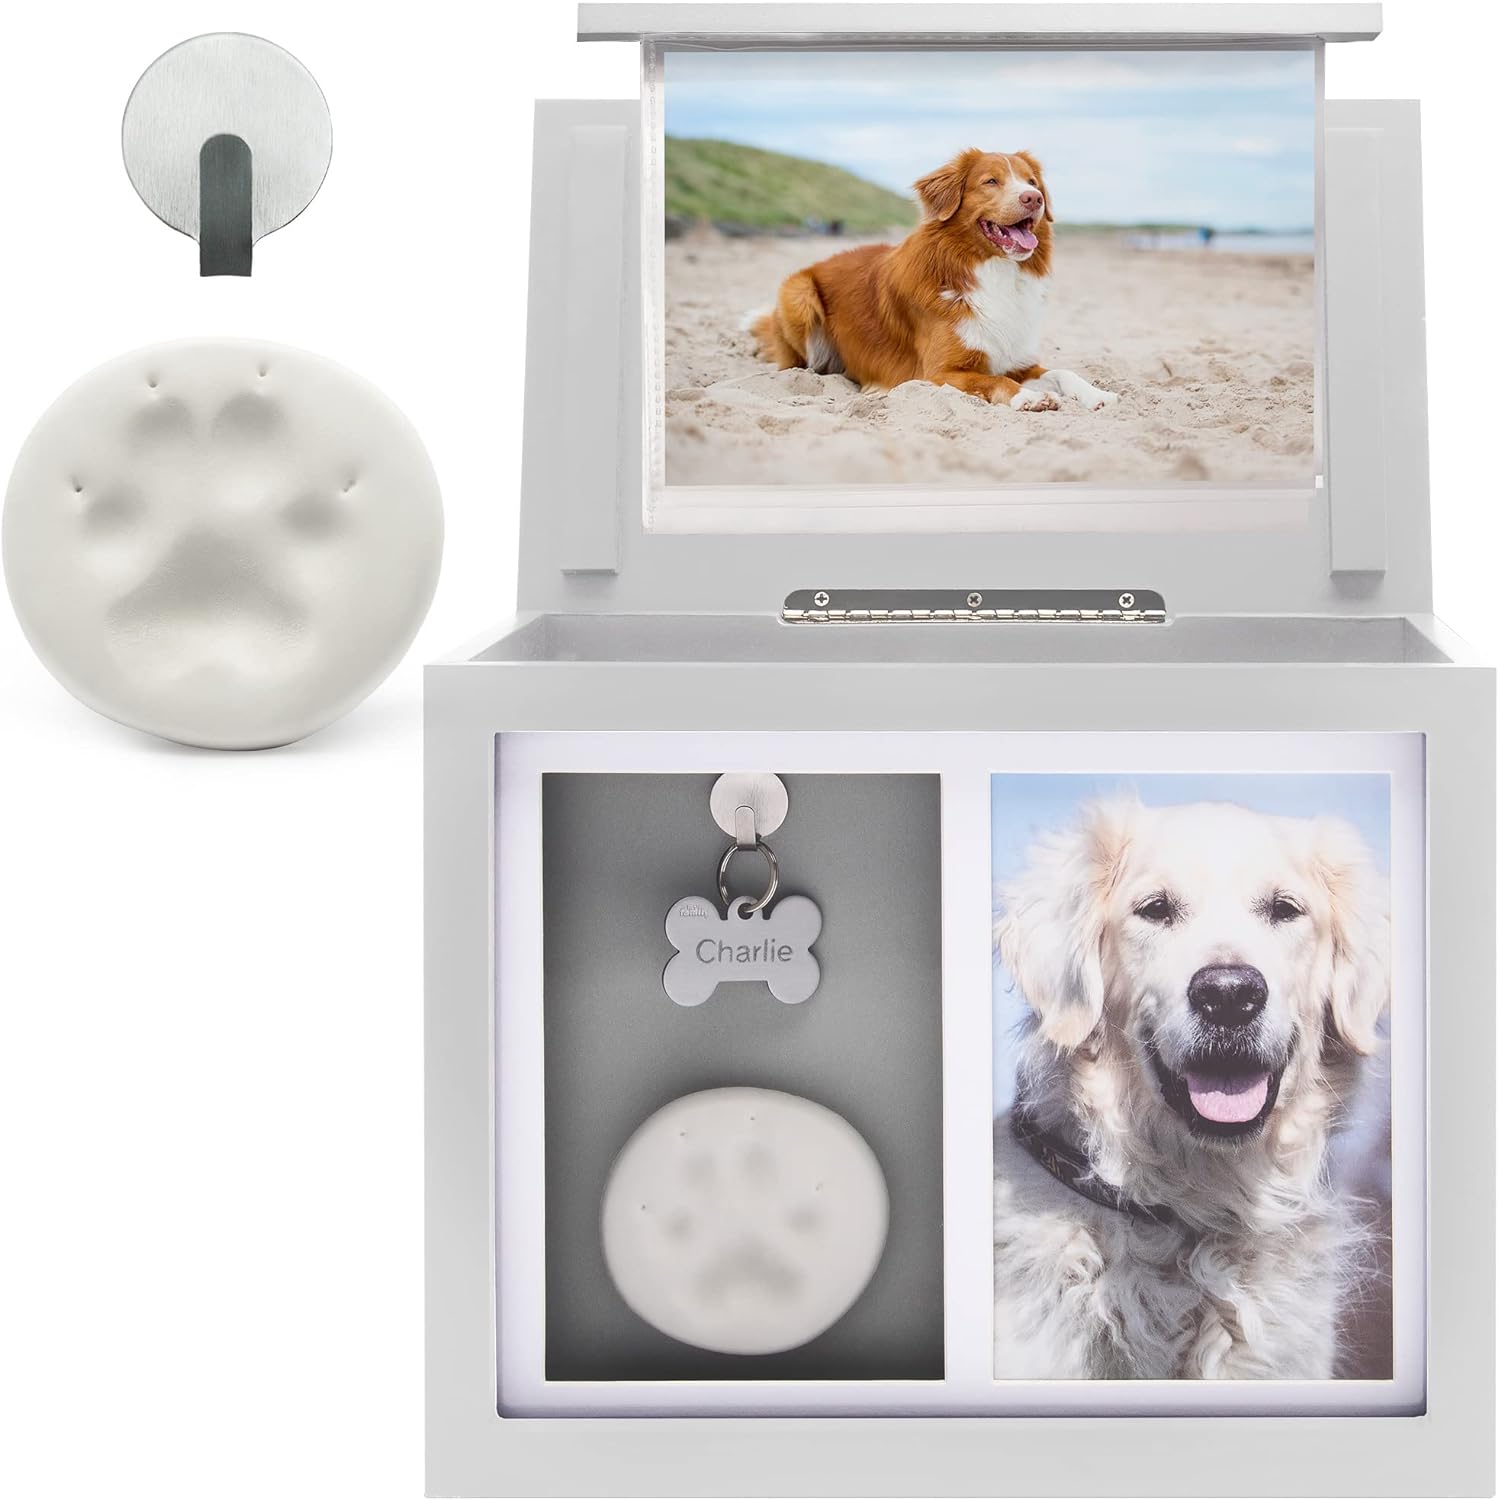 Sduby Pet Urns for Dogs Ashes - Wooden Memorial Dog Urns for Ashes Personalized, Premium Cat Urns for Ashes, Clay Imprint Kit, Pet Paw Print Kit, Keepsake Memory Frame, Photo Book